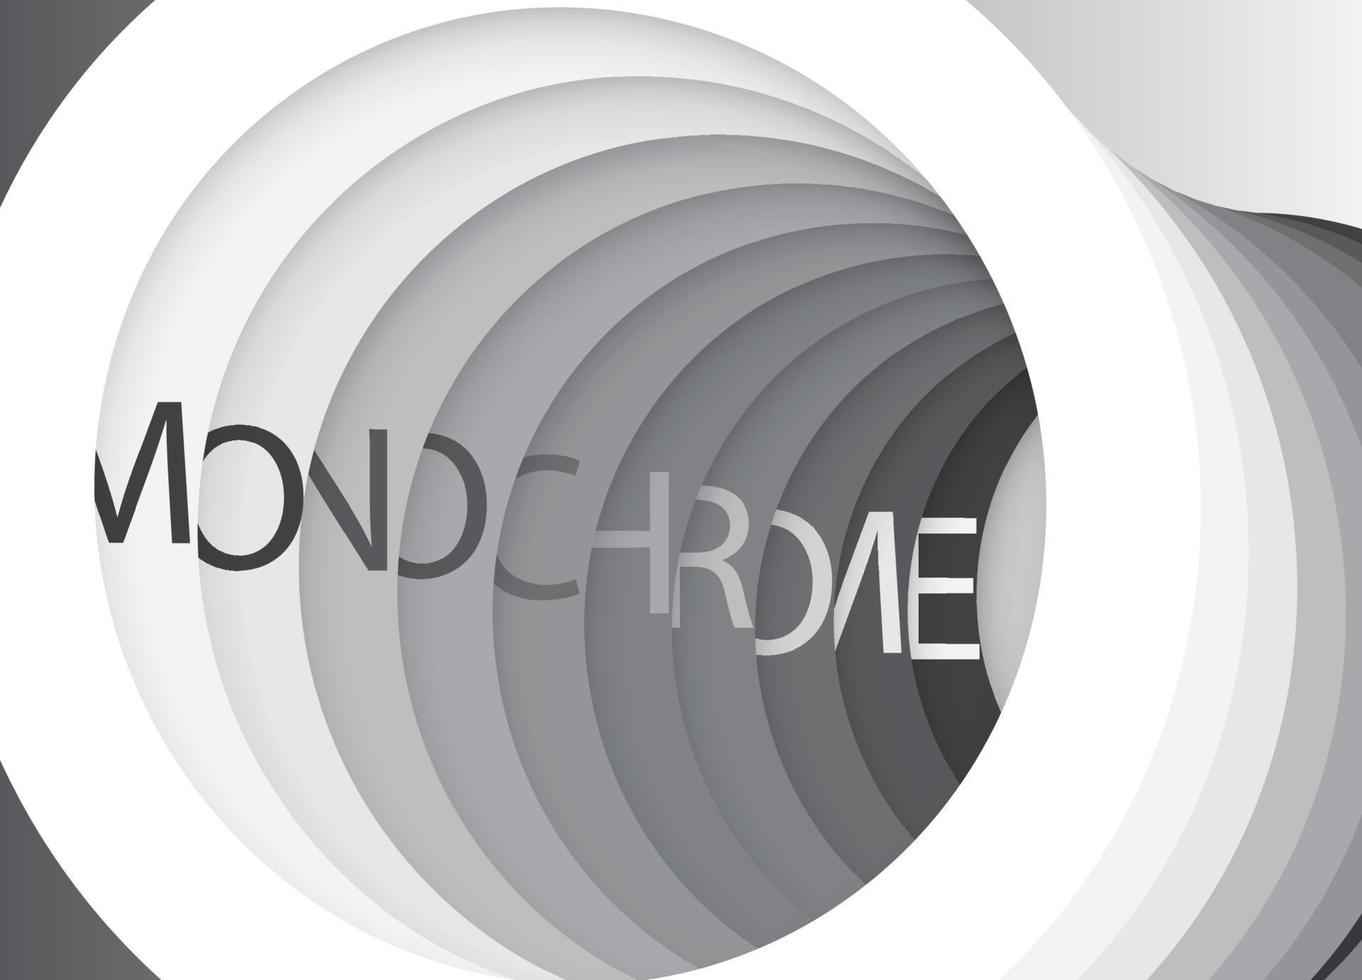 Simple circles of white grey and black shades, classic design post vector